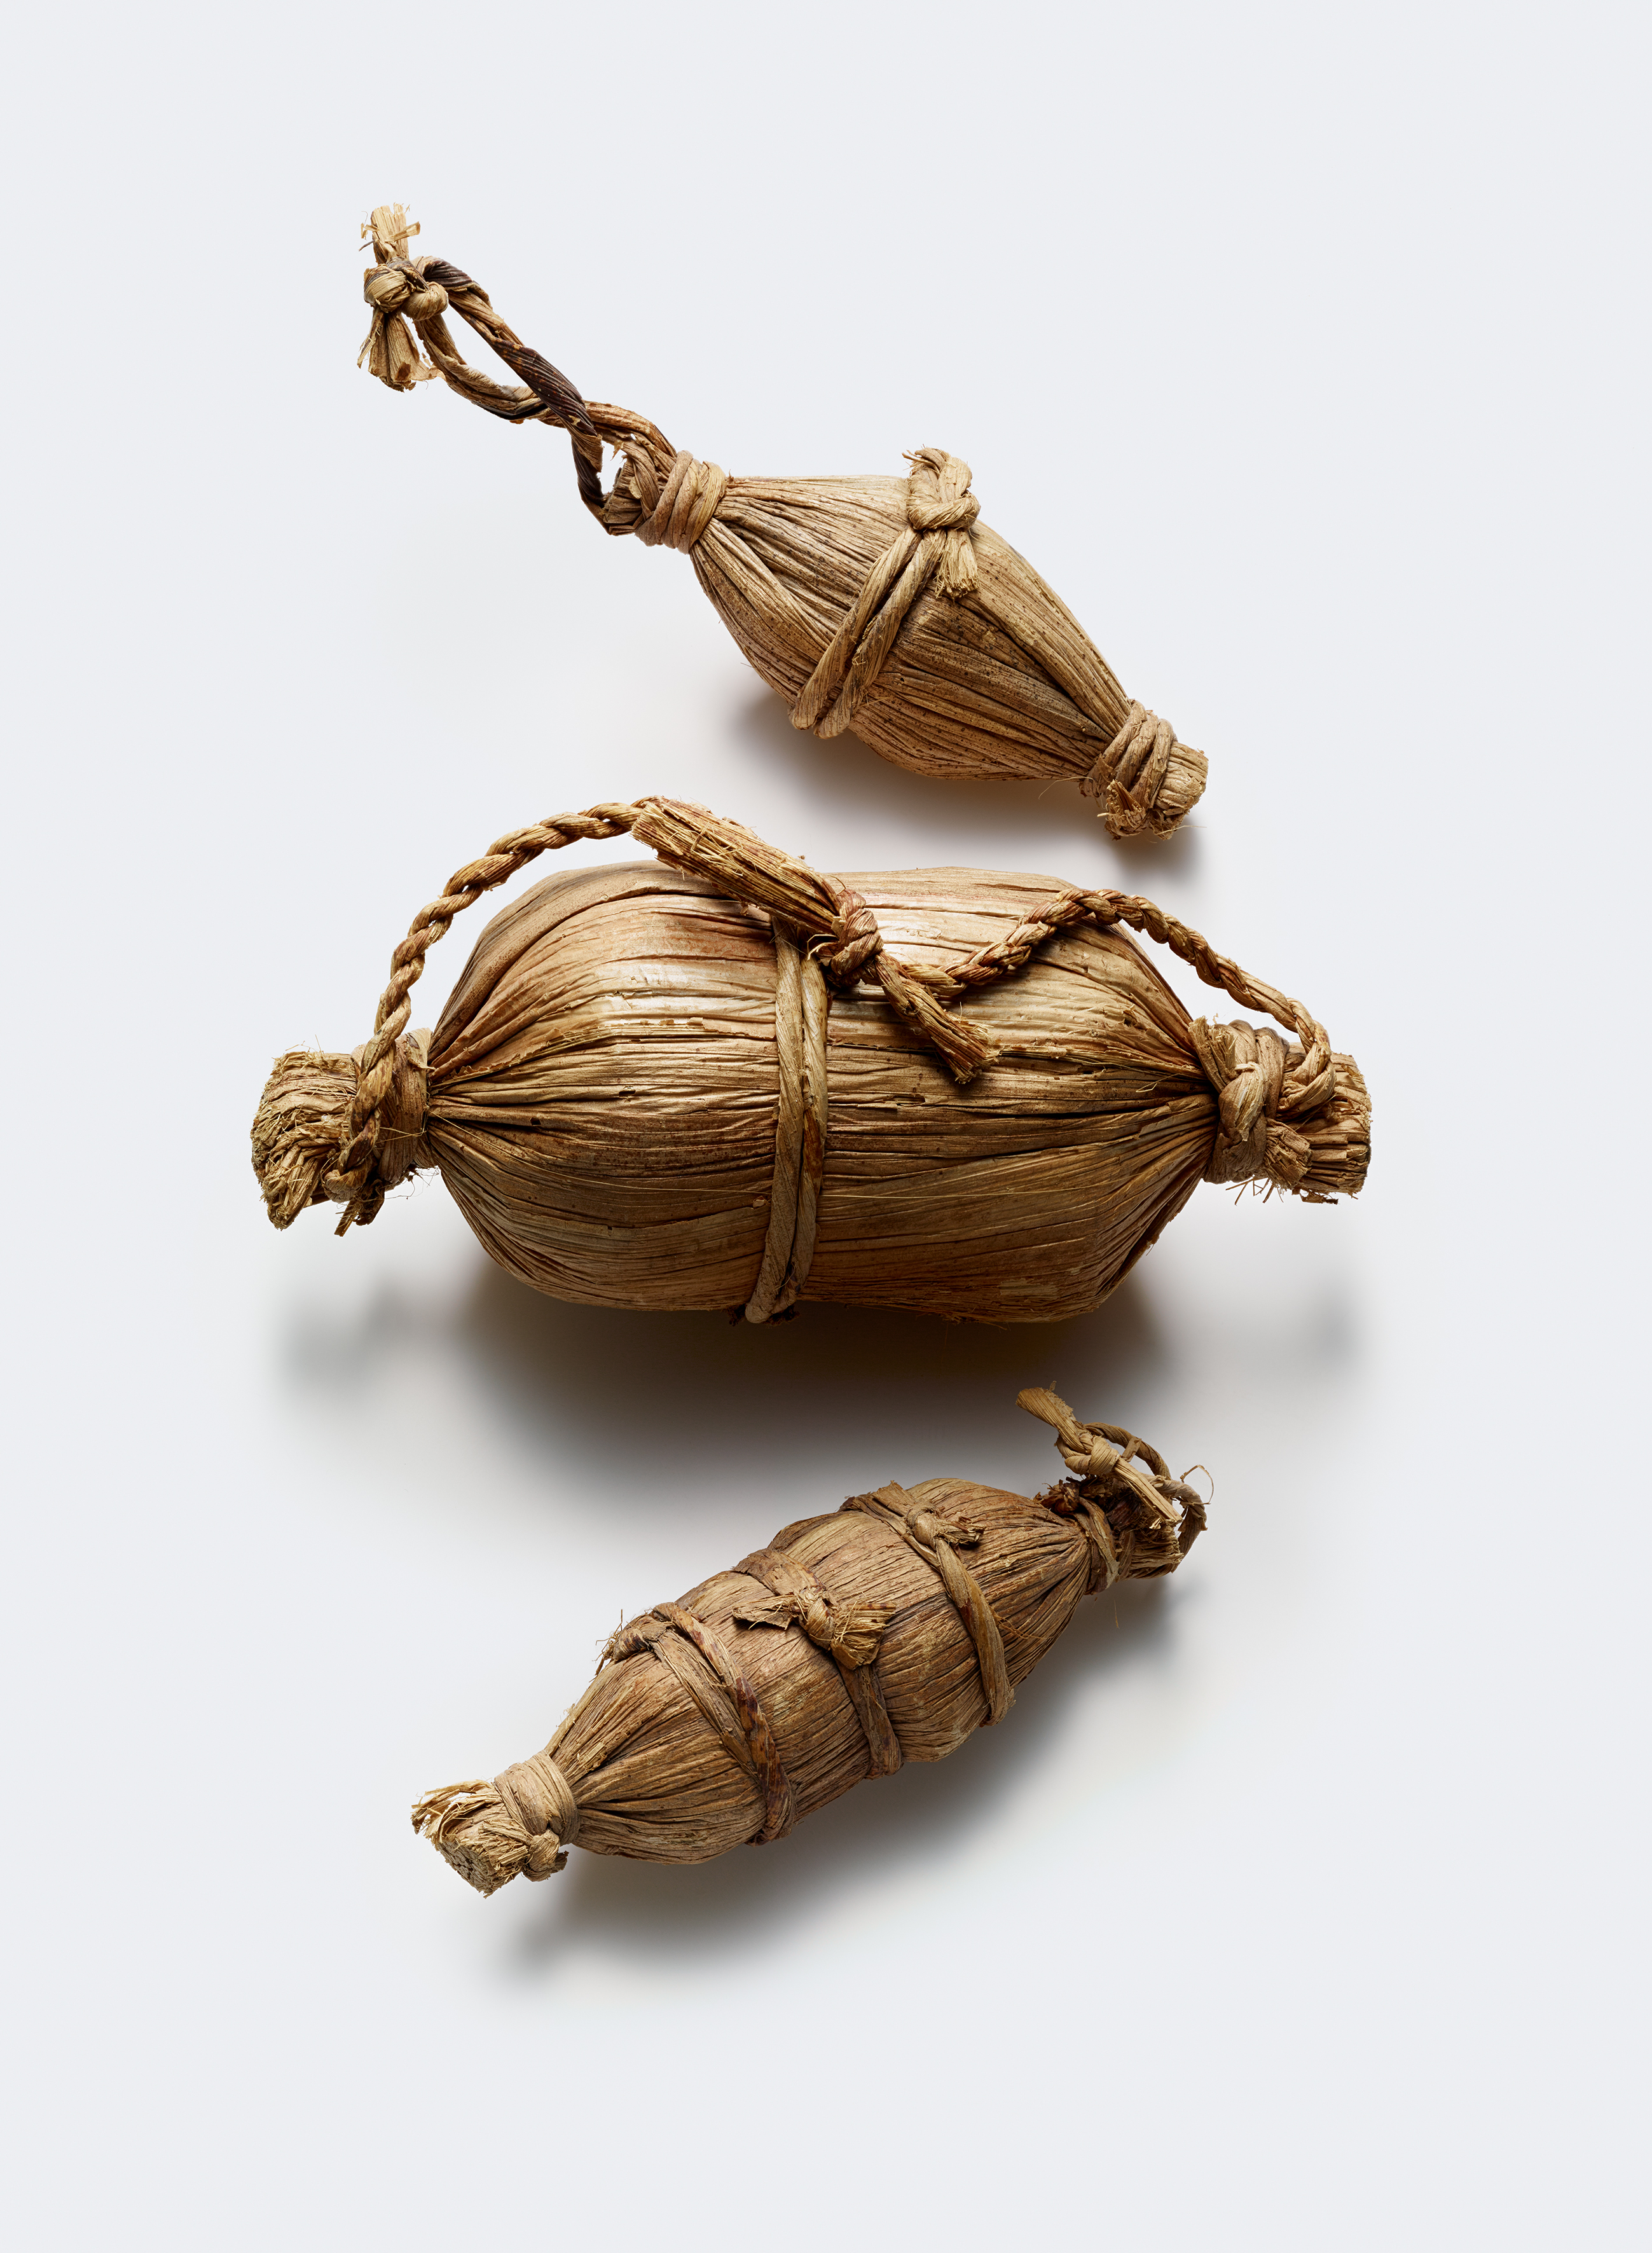 Ellen and Hans Paasche returned from their honeymoon with beans wrapped in leaves as they were sold at the market. Collection Ethnological Museum UZH, Inv.Nr.06051a,c,d.